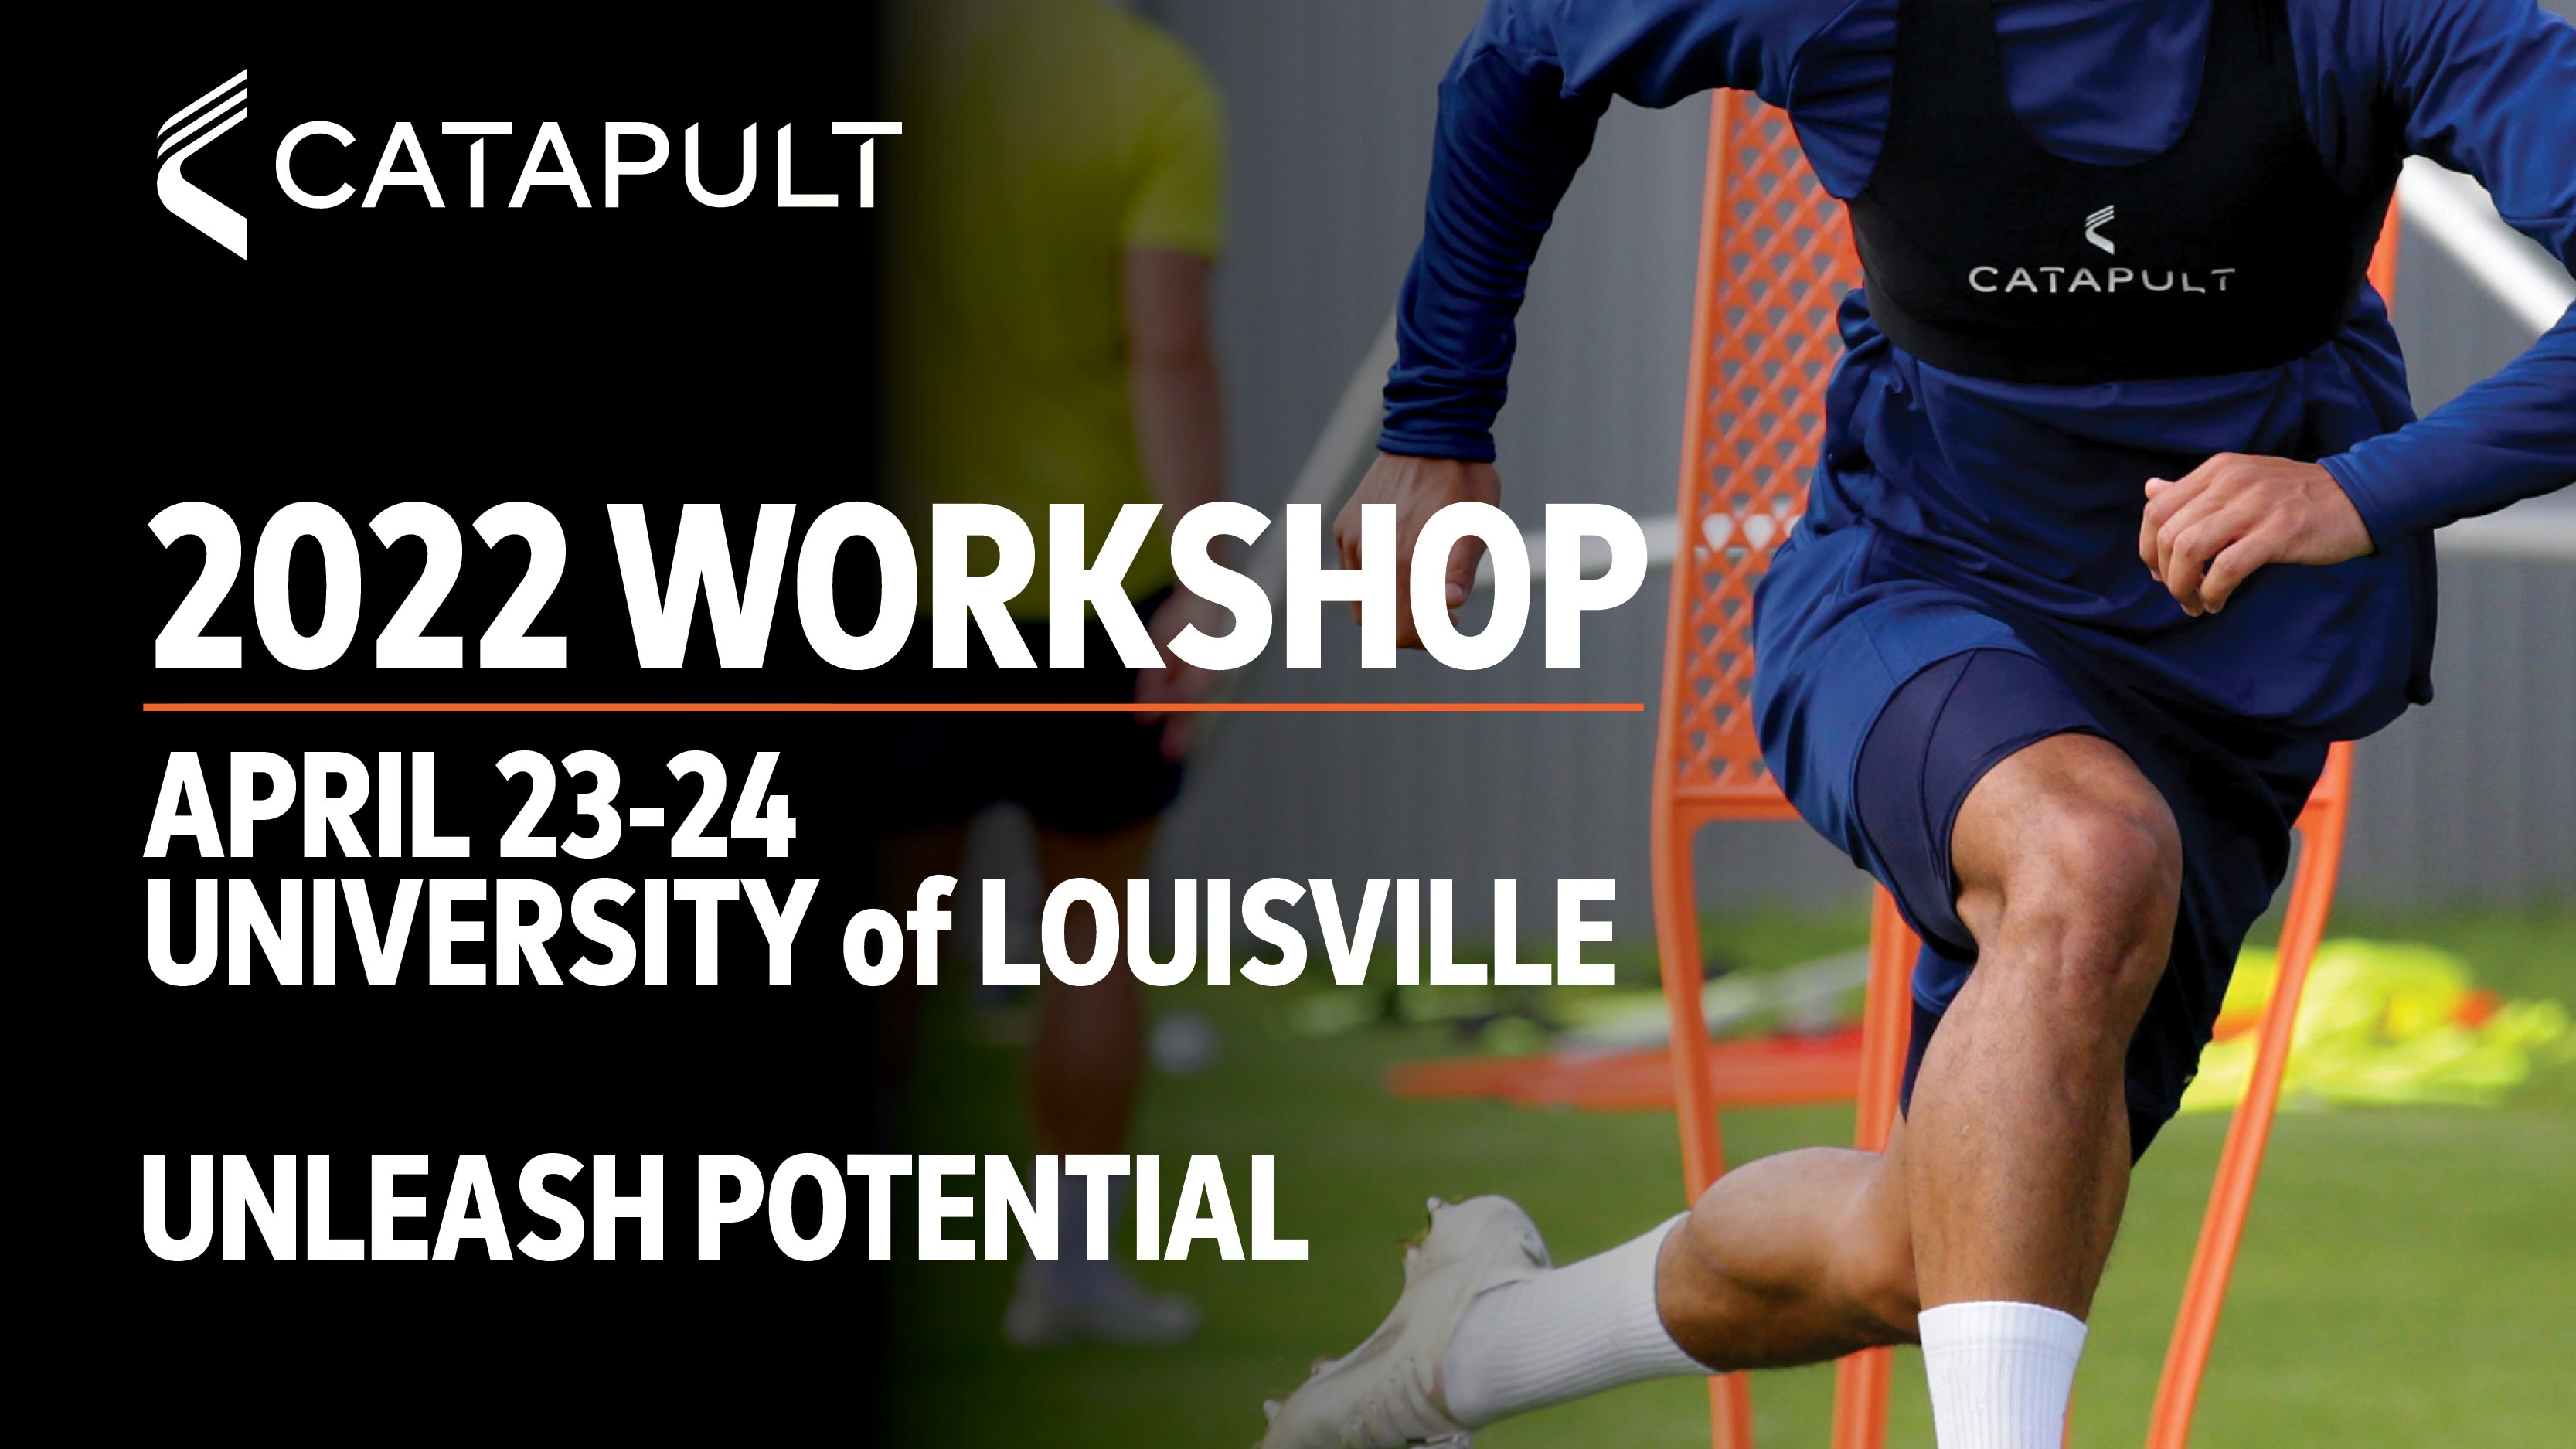 Dr. Pat Ivey on X: This weekend I'll be at @CatapultSports's